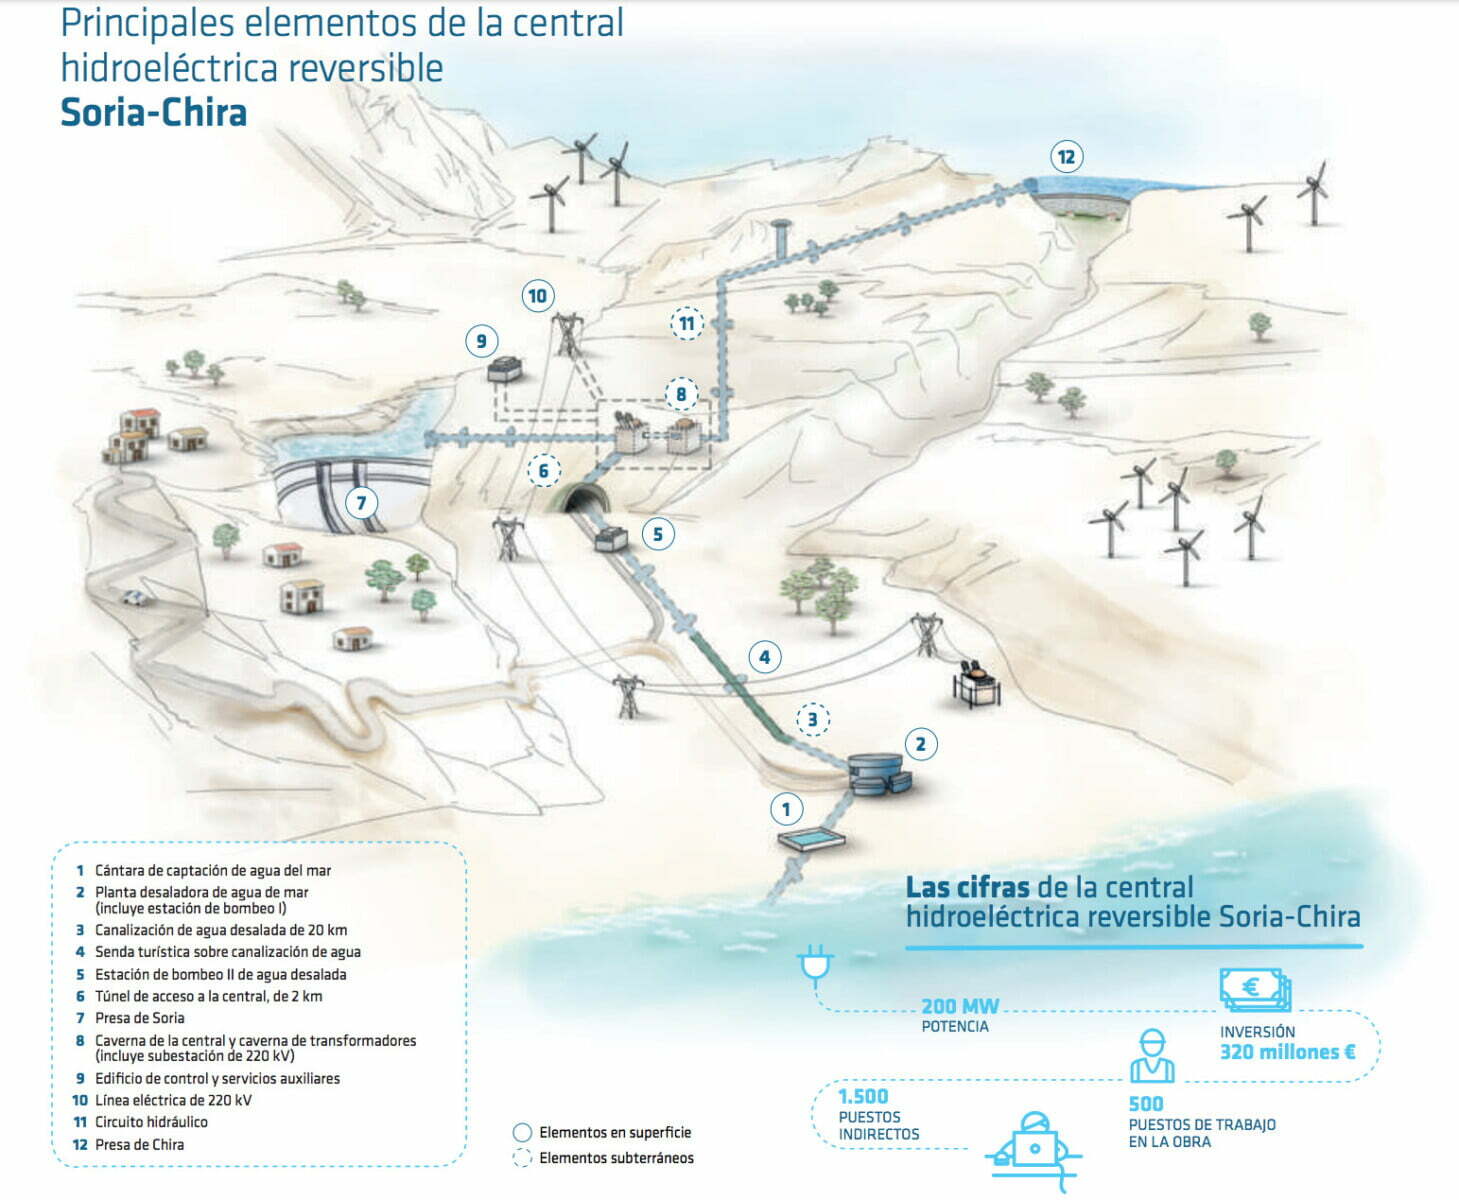 Work begins on Salto de Chira, the first large energy storage system in the Canary Islands